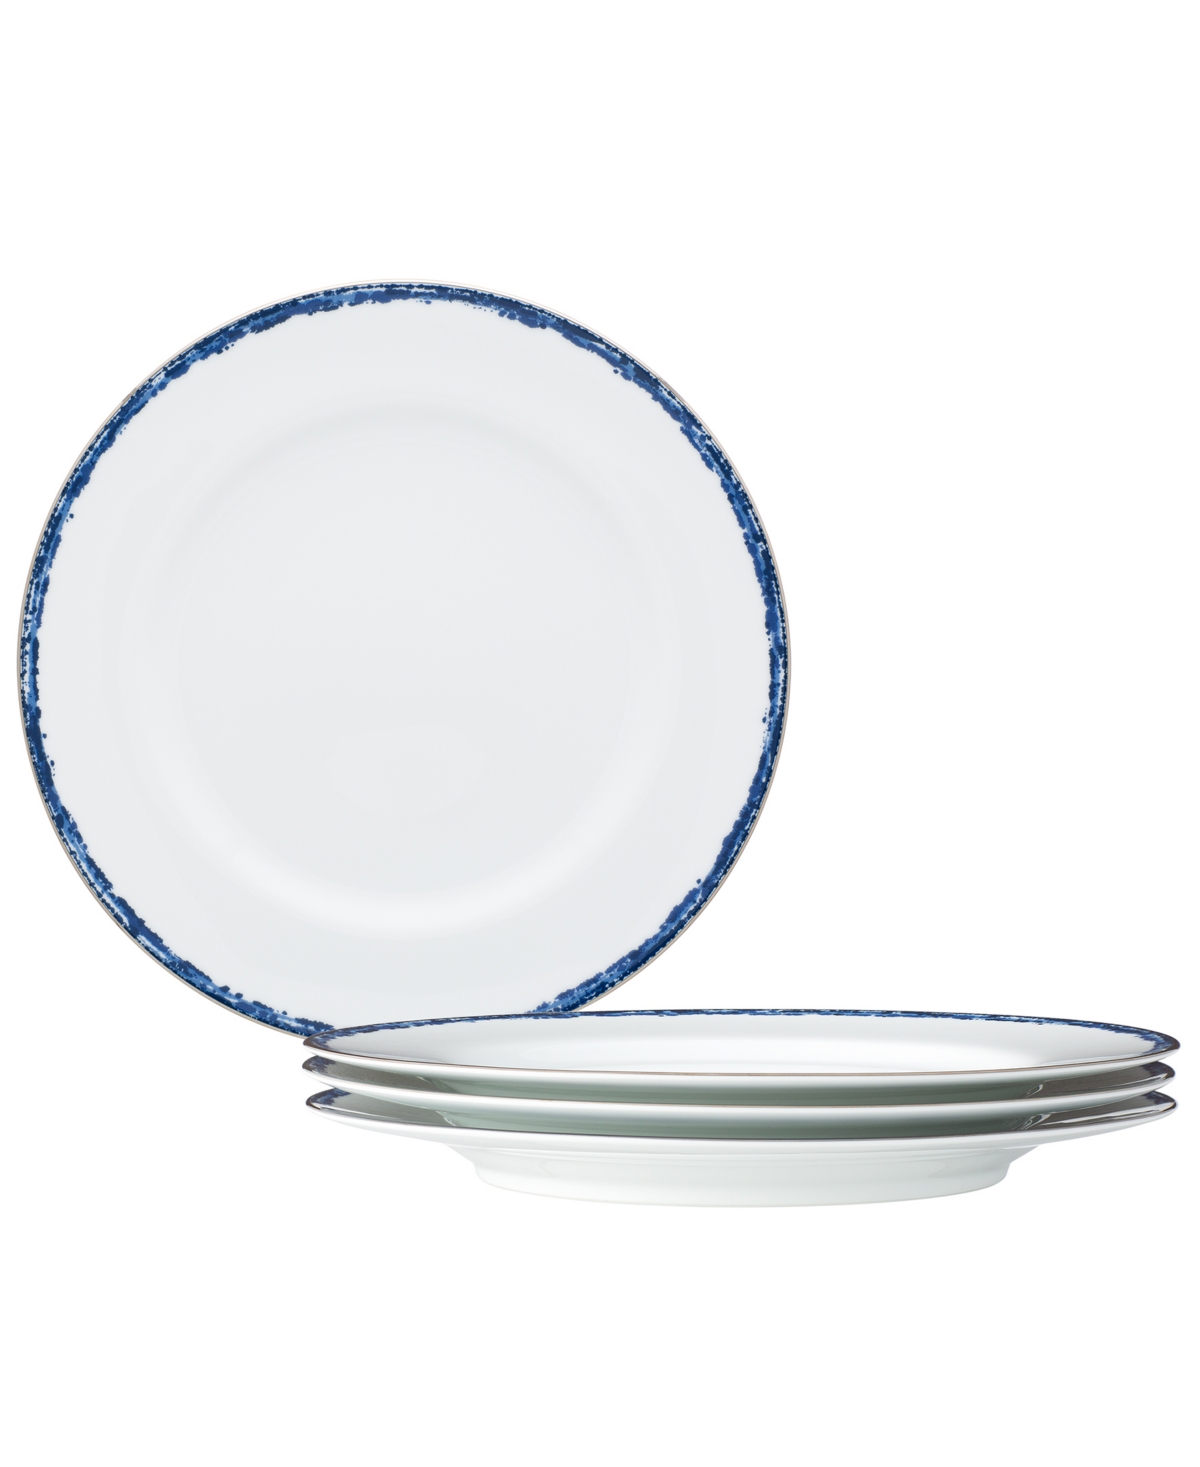 Noritake Rill 4 Piece Dinner Plate Set, Service For 4 In Blue